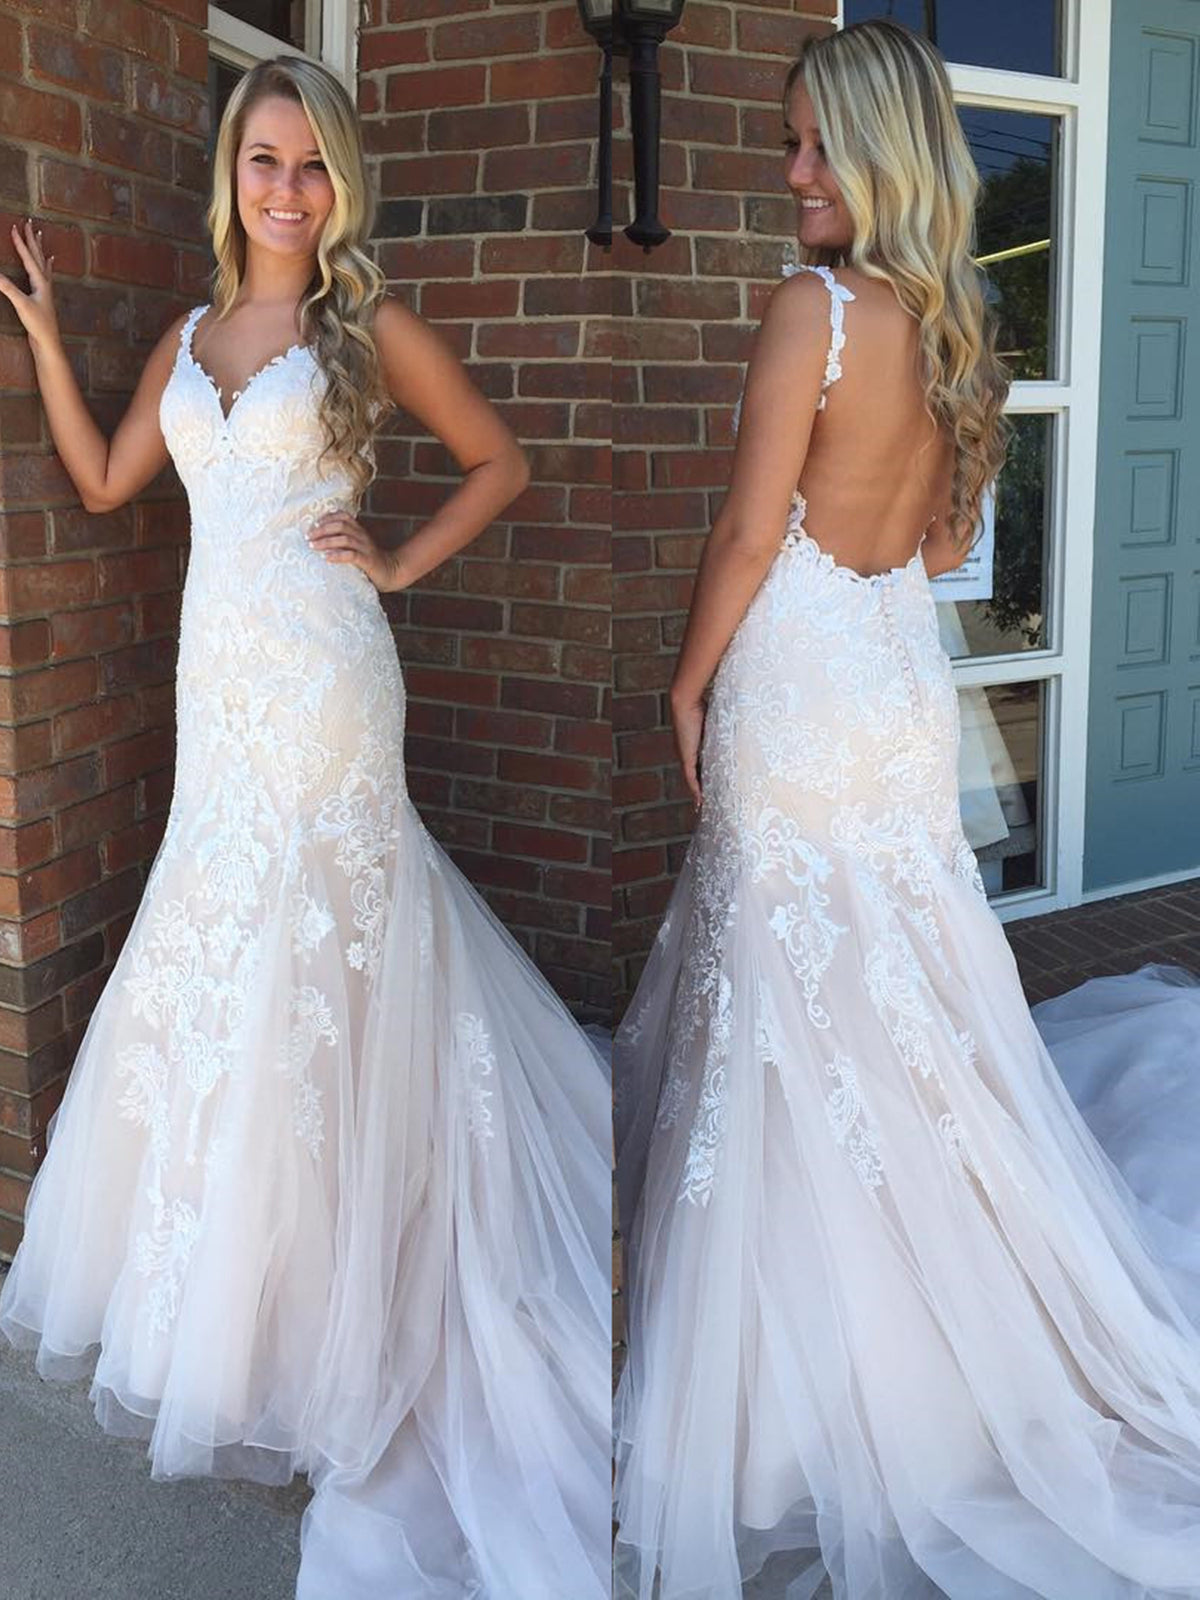 V Neck Backless Mermaid Champagne Lace Long Prom Wedding Dresses with Train, Champagne Lace Formal Evening Dresses 